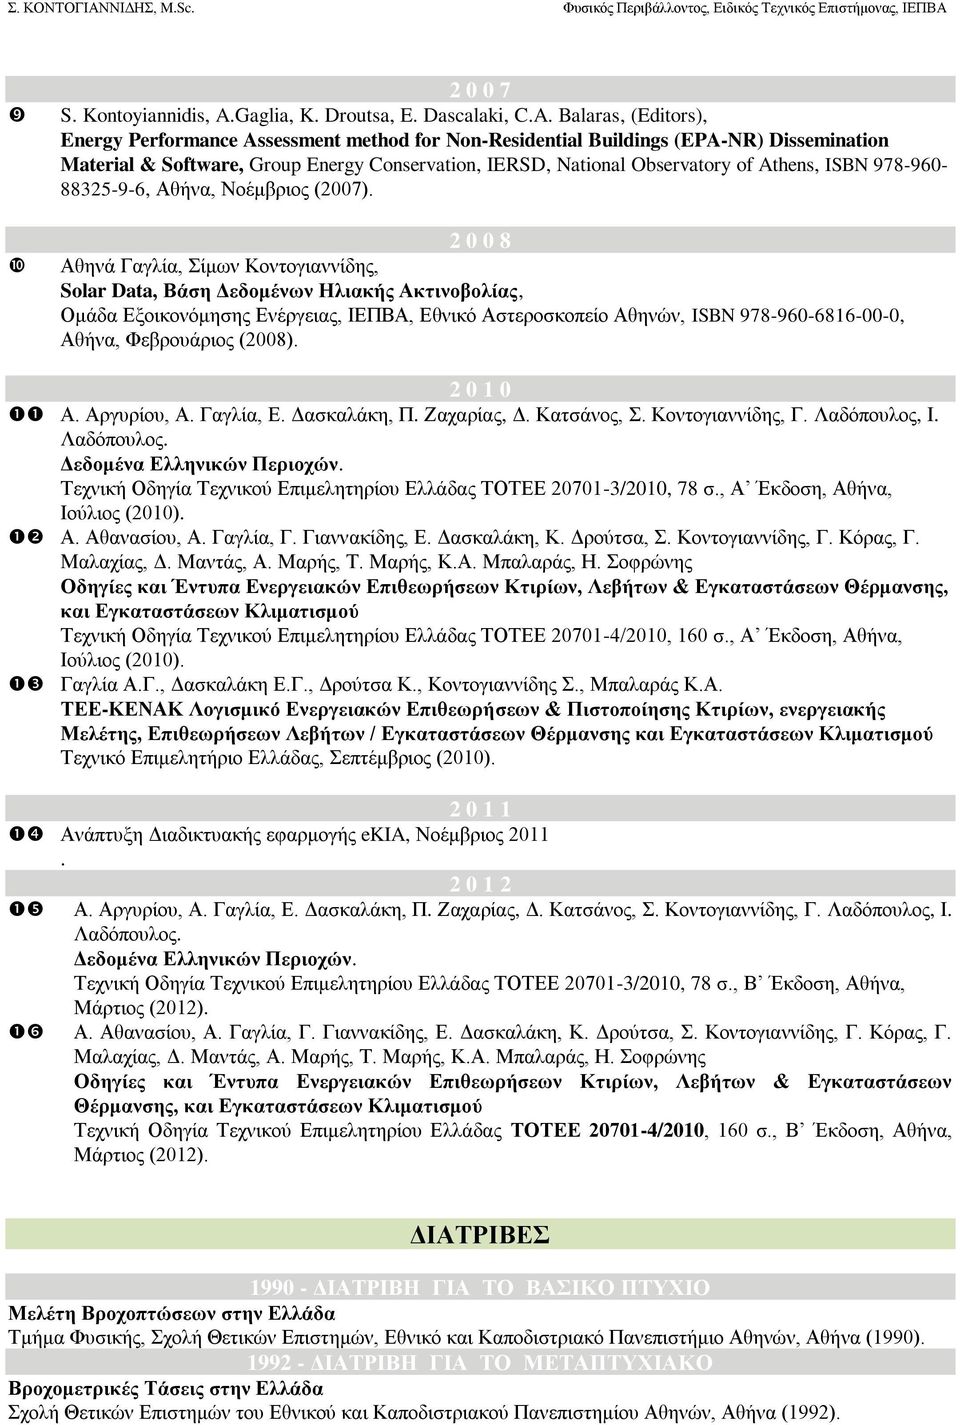 Balaras, (Editors), Energy Performance Assessment method for Non-Residential Buildings (EPA-NR) Dissemination Material & Software, Group Energy Conservation, IERSD, National Observatory of Athens,